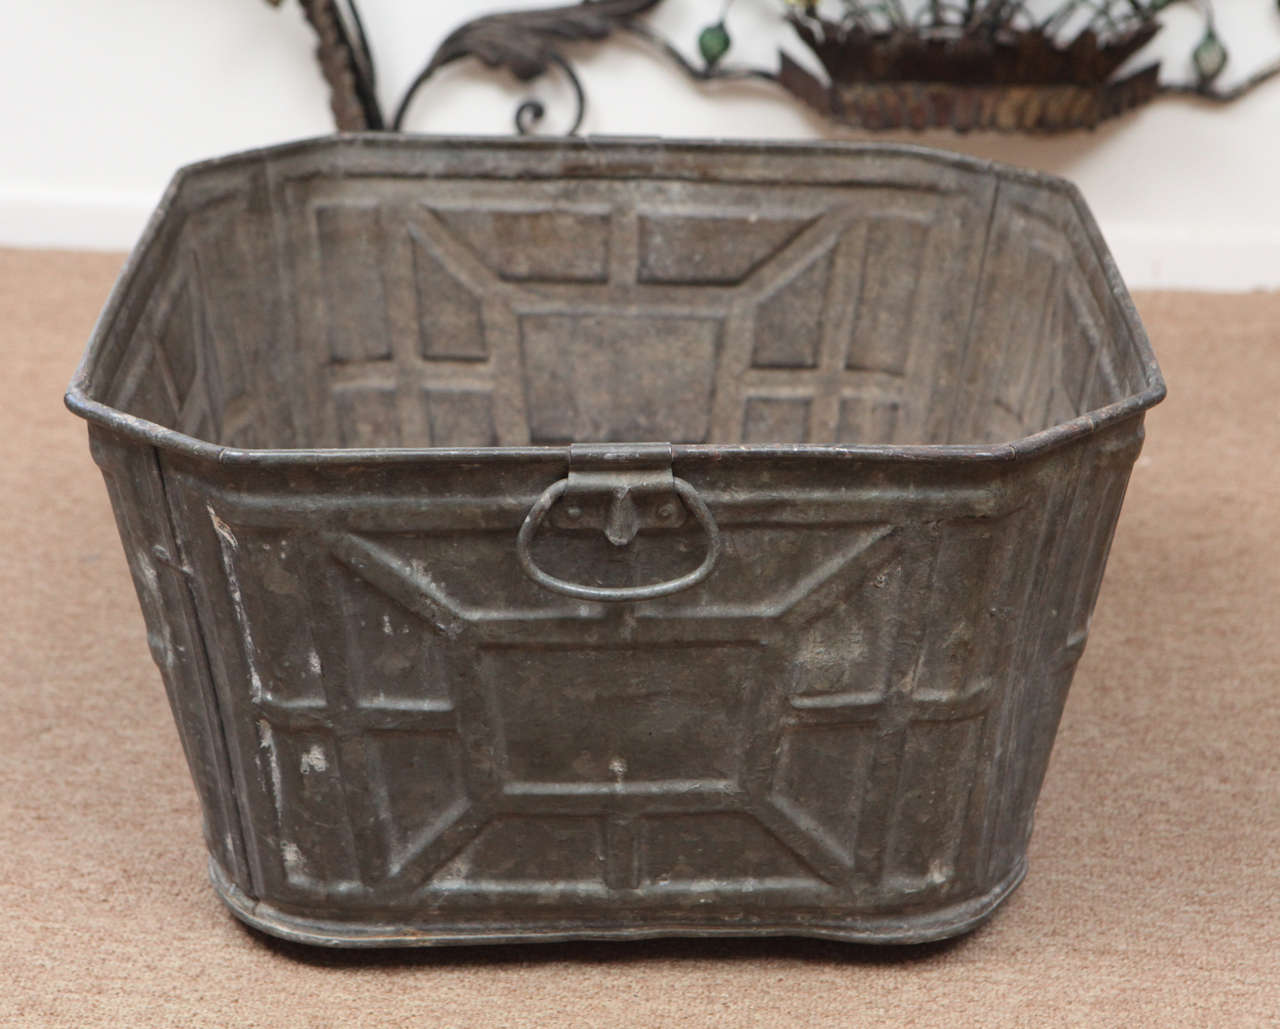 This unique item is a rare 1930's industrial piece with pressed metal art deco designs and a really nice geometric shape. The large metal tub with two handles would work well as a fireplace accessory or container for any number of items. It is